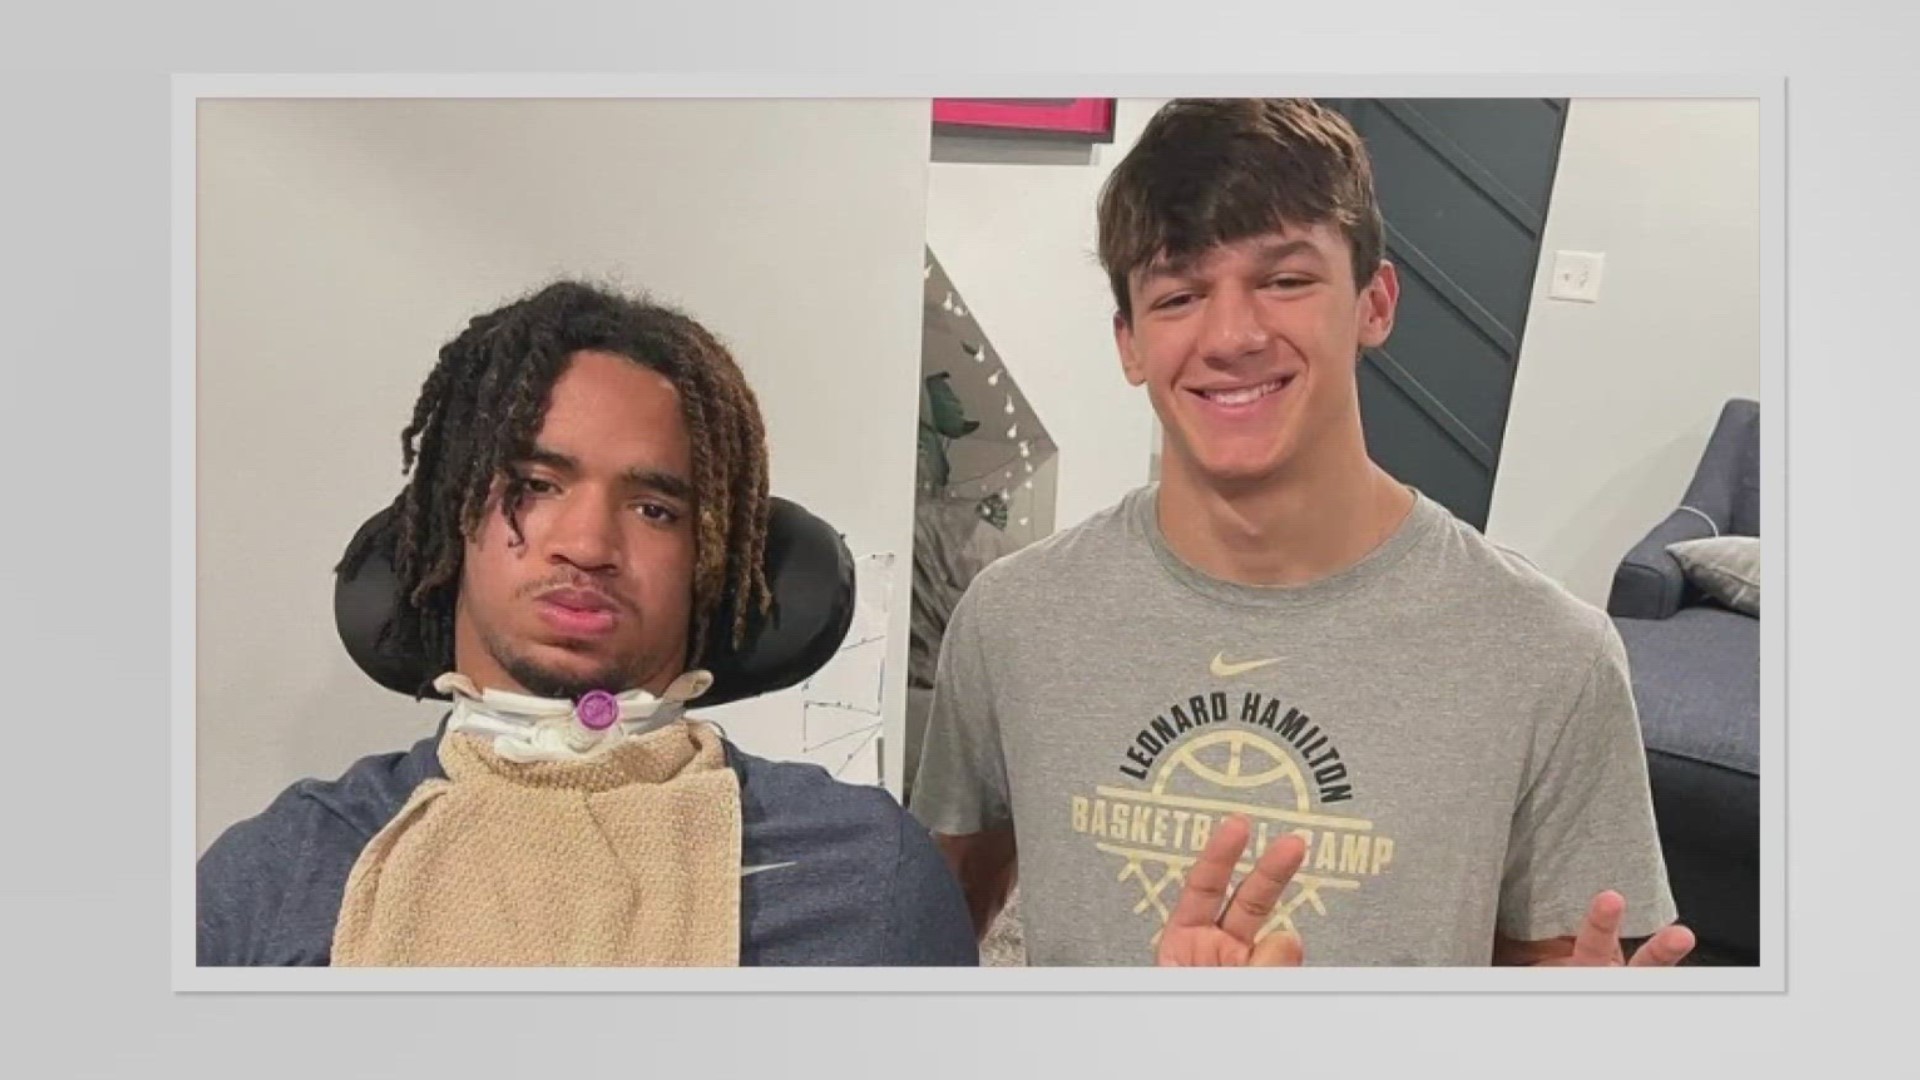 Jordan Sloan suffered a traumatic brain injury while playing his homecoming football game. His best friend, Marcos San Miguel, continues to fight for his friend.